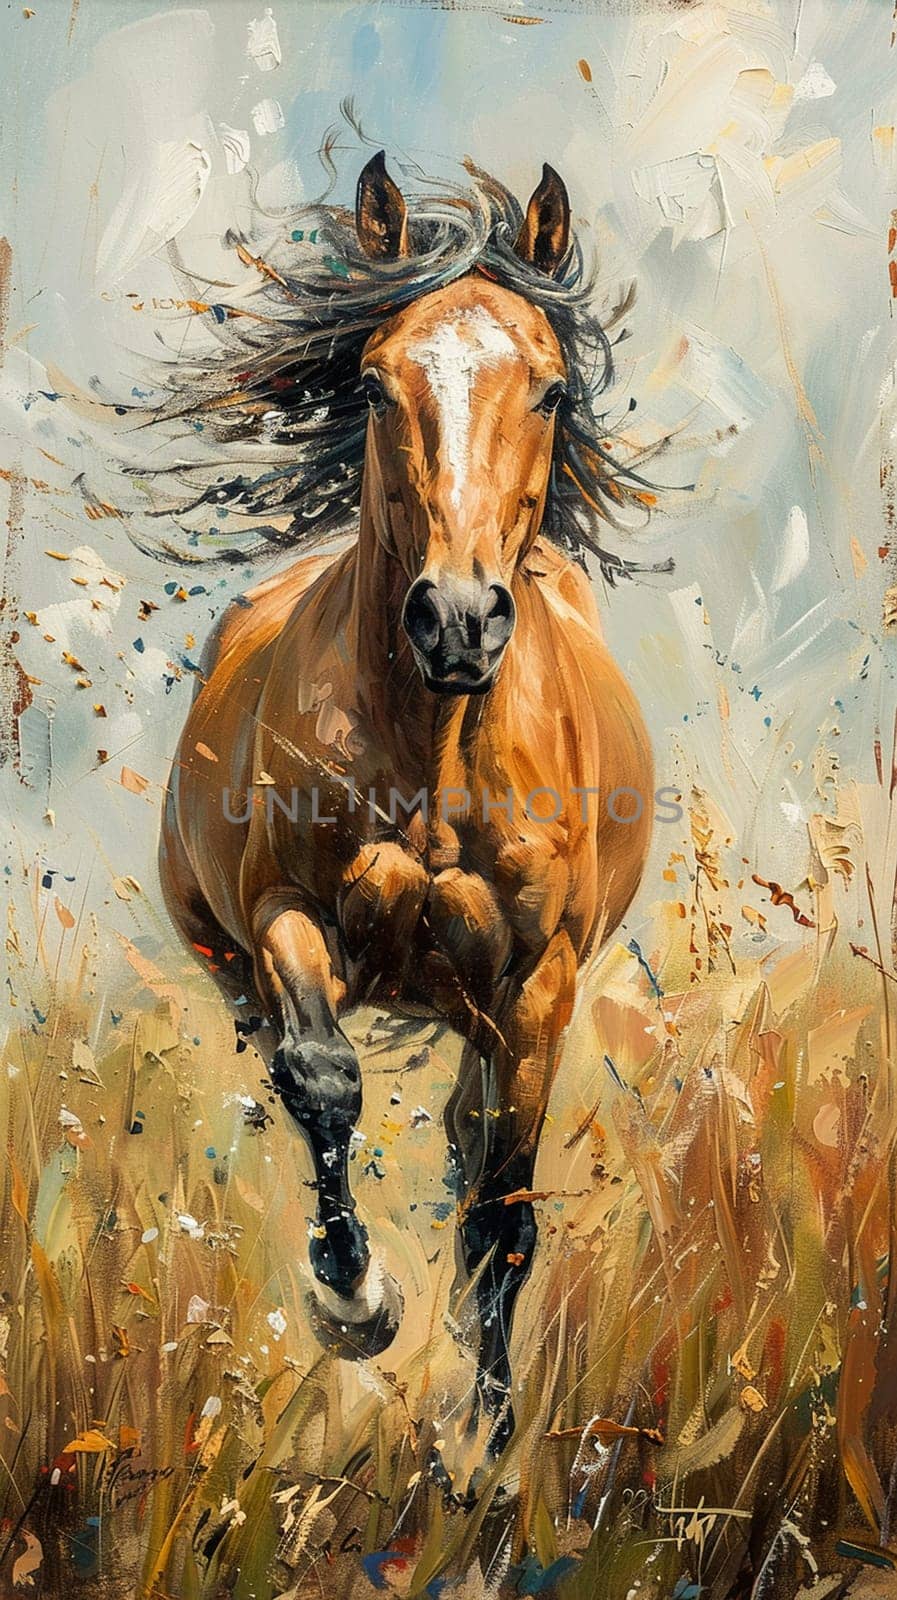 Wild horse running through a meadow, captured with expressionist brushstrokes and freedom of movement.